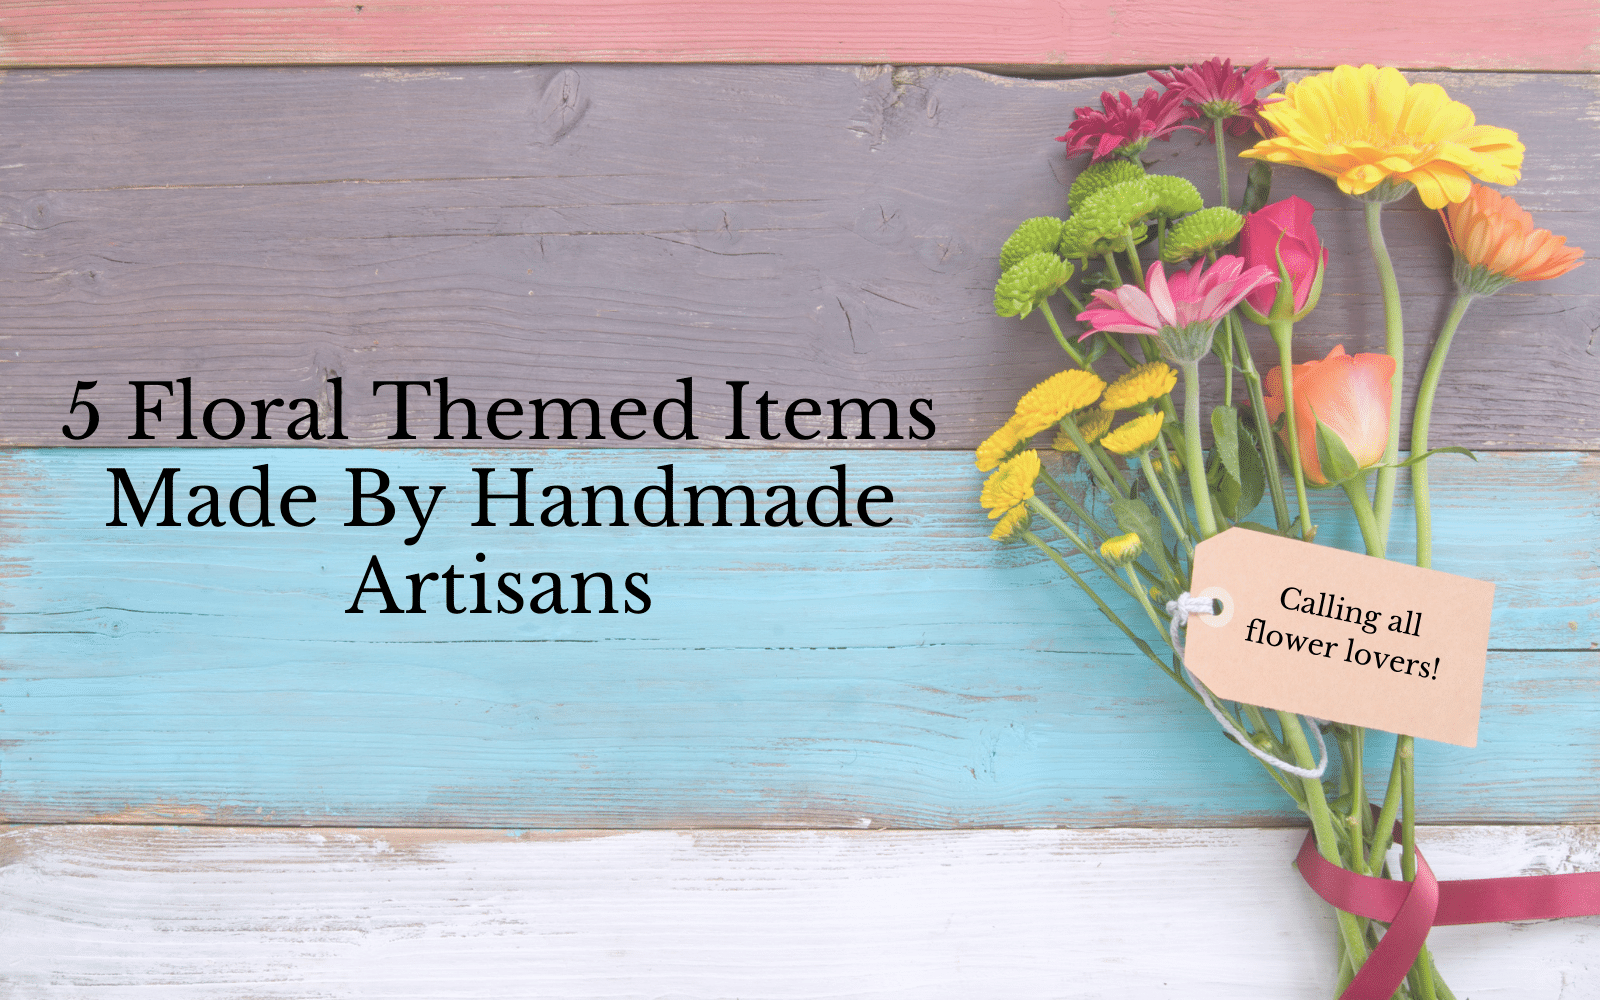 5 Floral Themed Items Made By Handmade Artisans